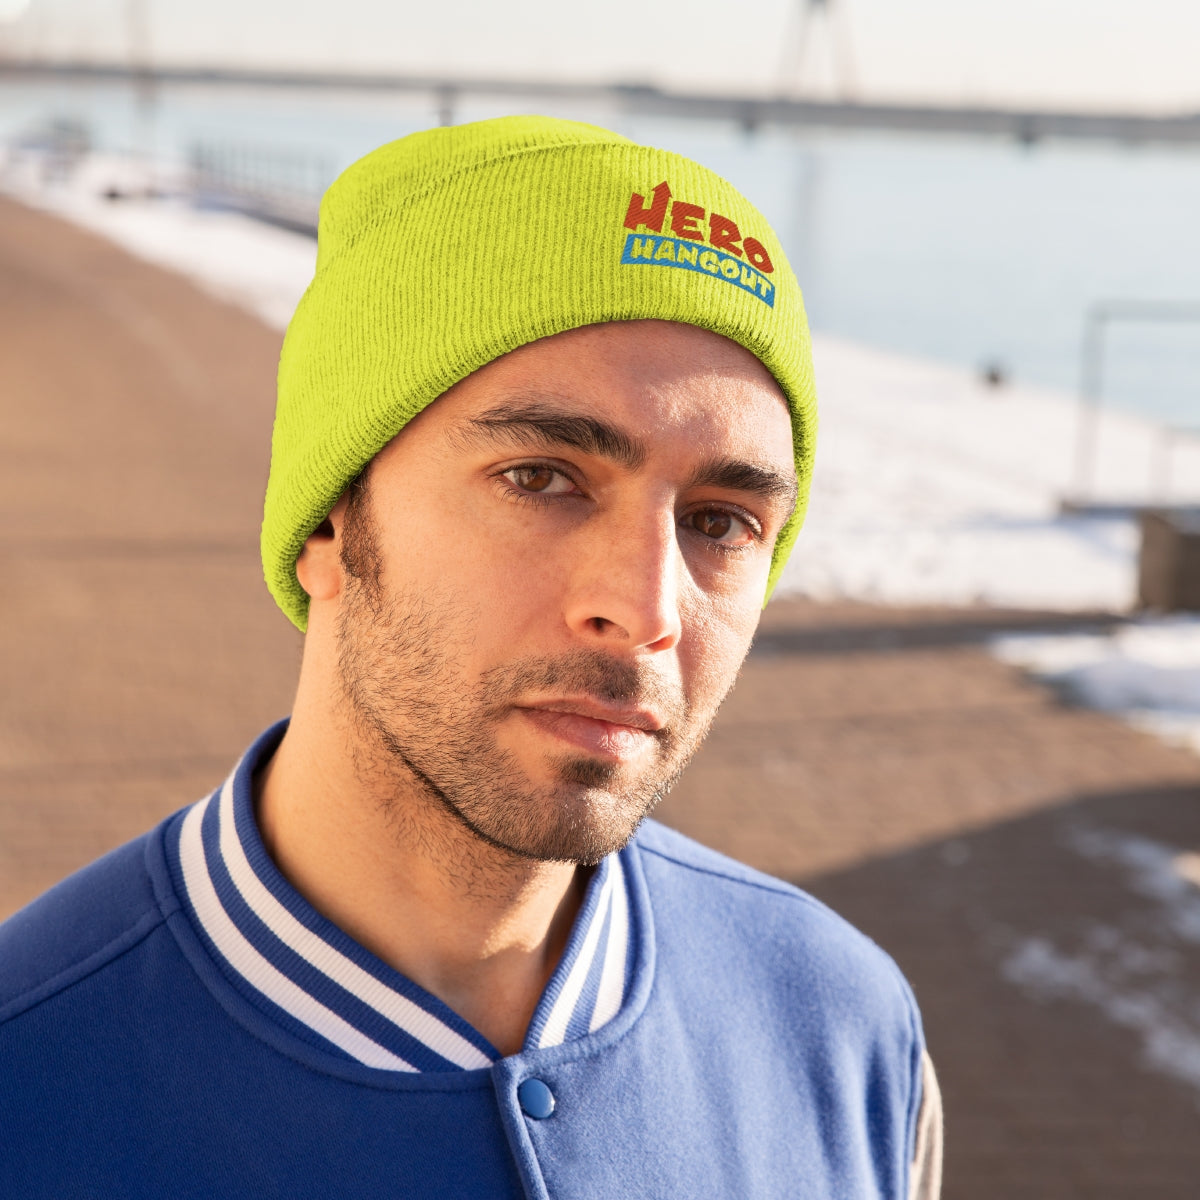 HeroHangout Embroidered Knit Beanie